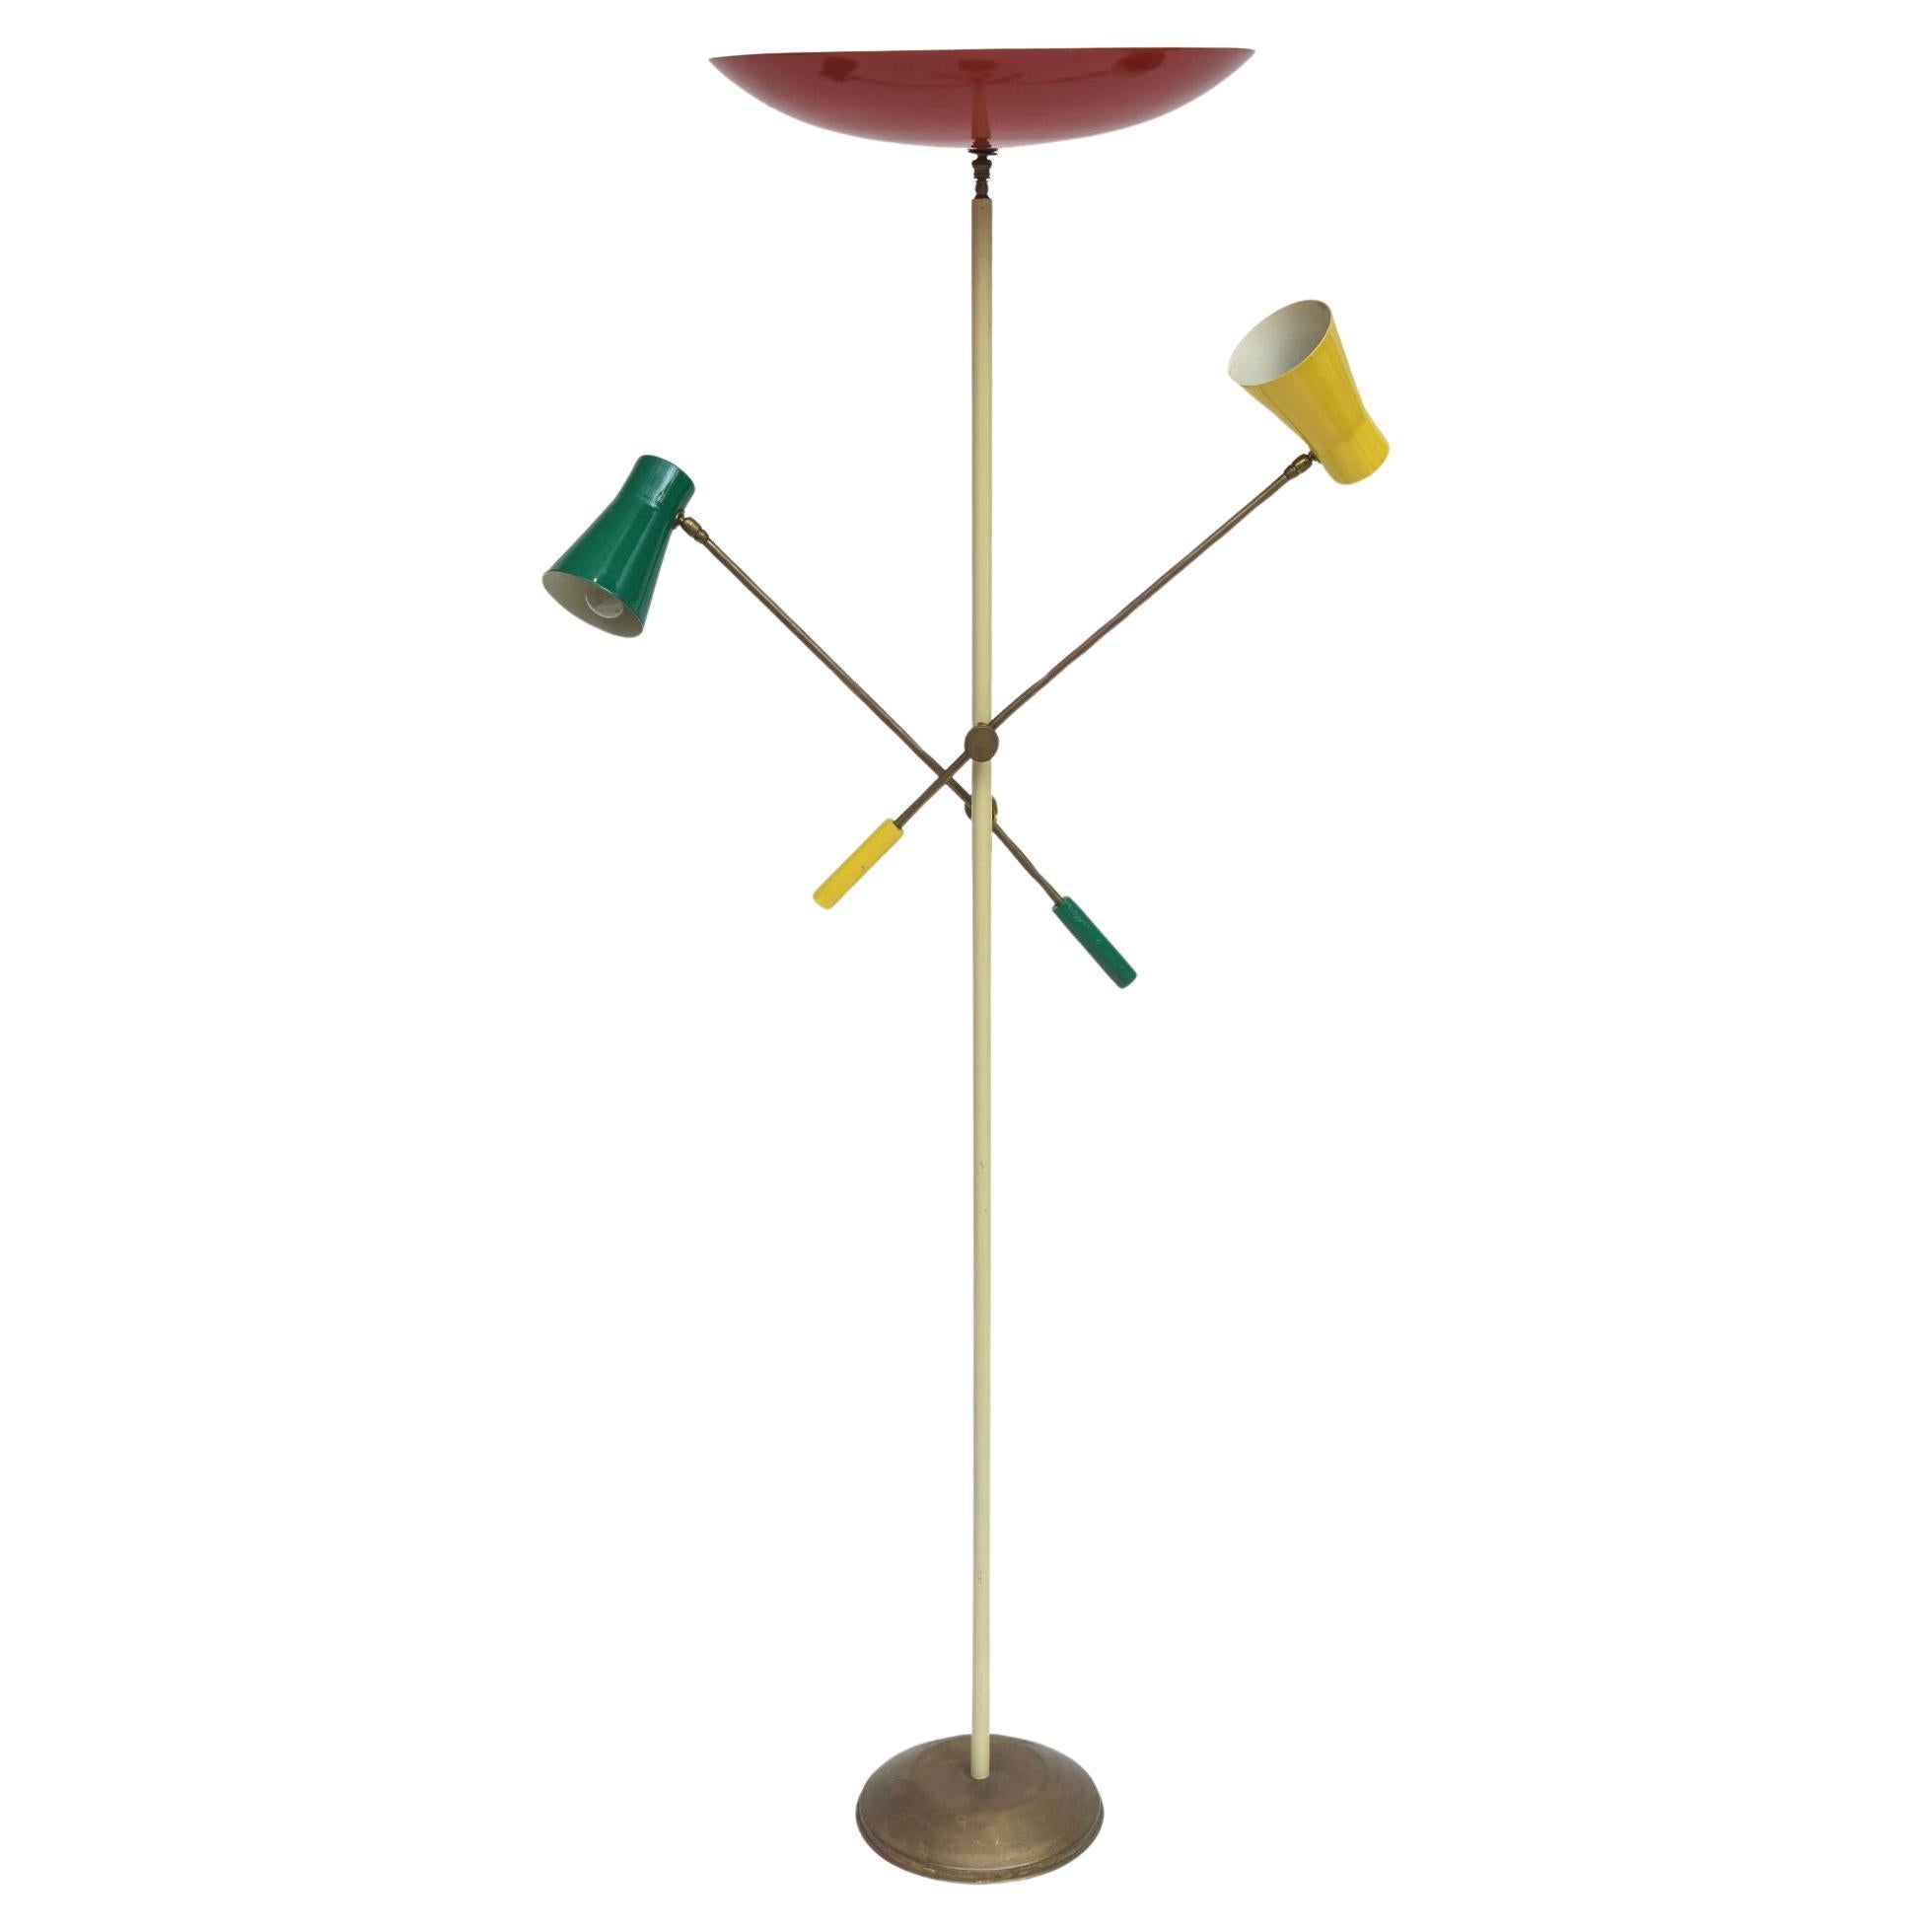 1950s Italian Brass Floor Lamp with Tri-colored Enameled Shades